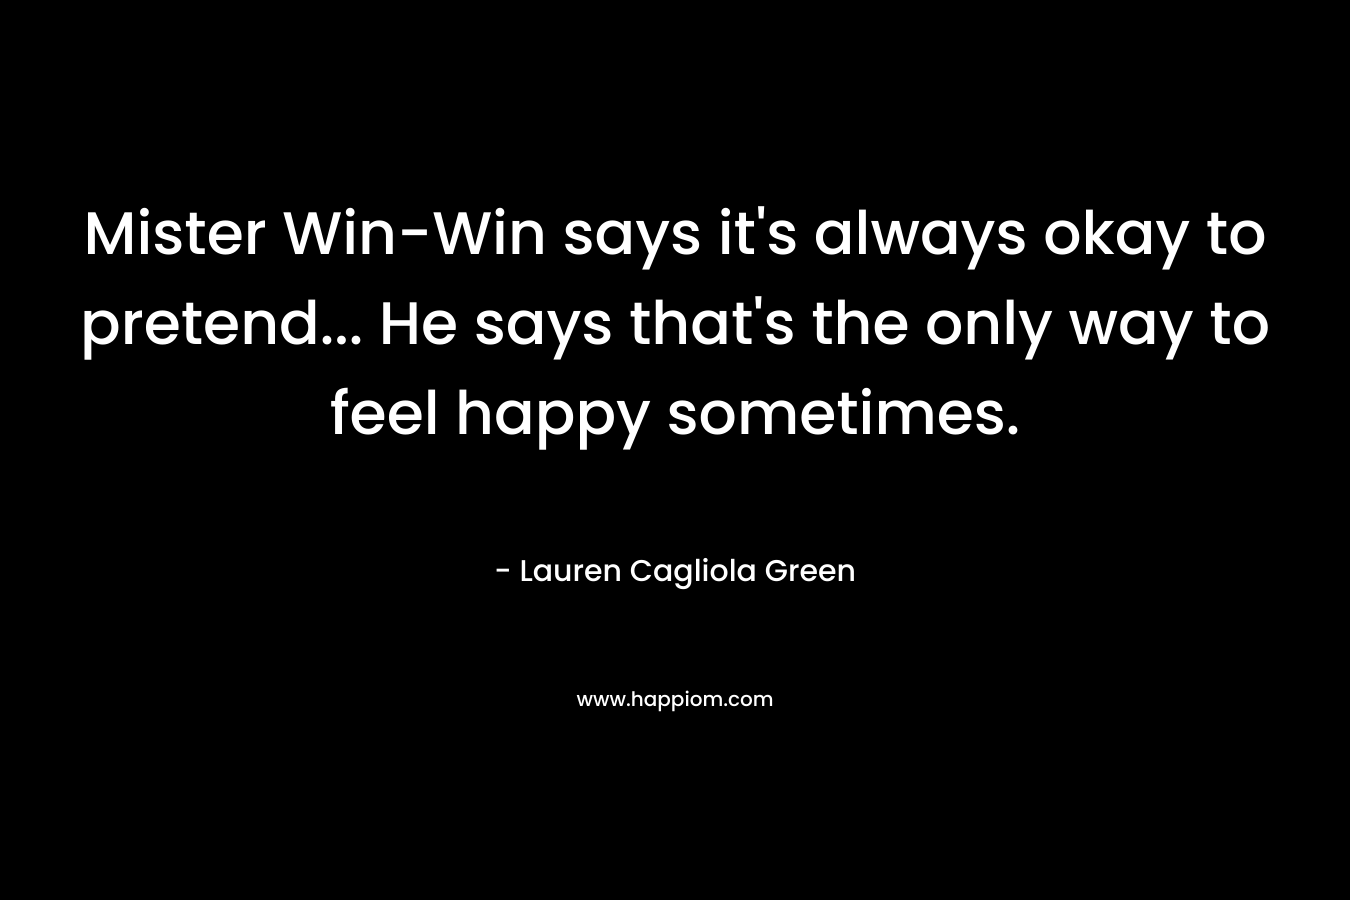 Mister Win-Win says it’s always okay to pretend… He says that’s the only way to feel happy sometimes. – Lauren Cagliola Green